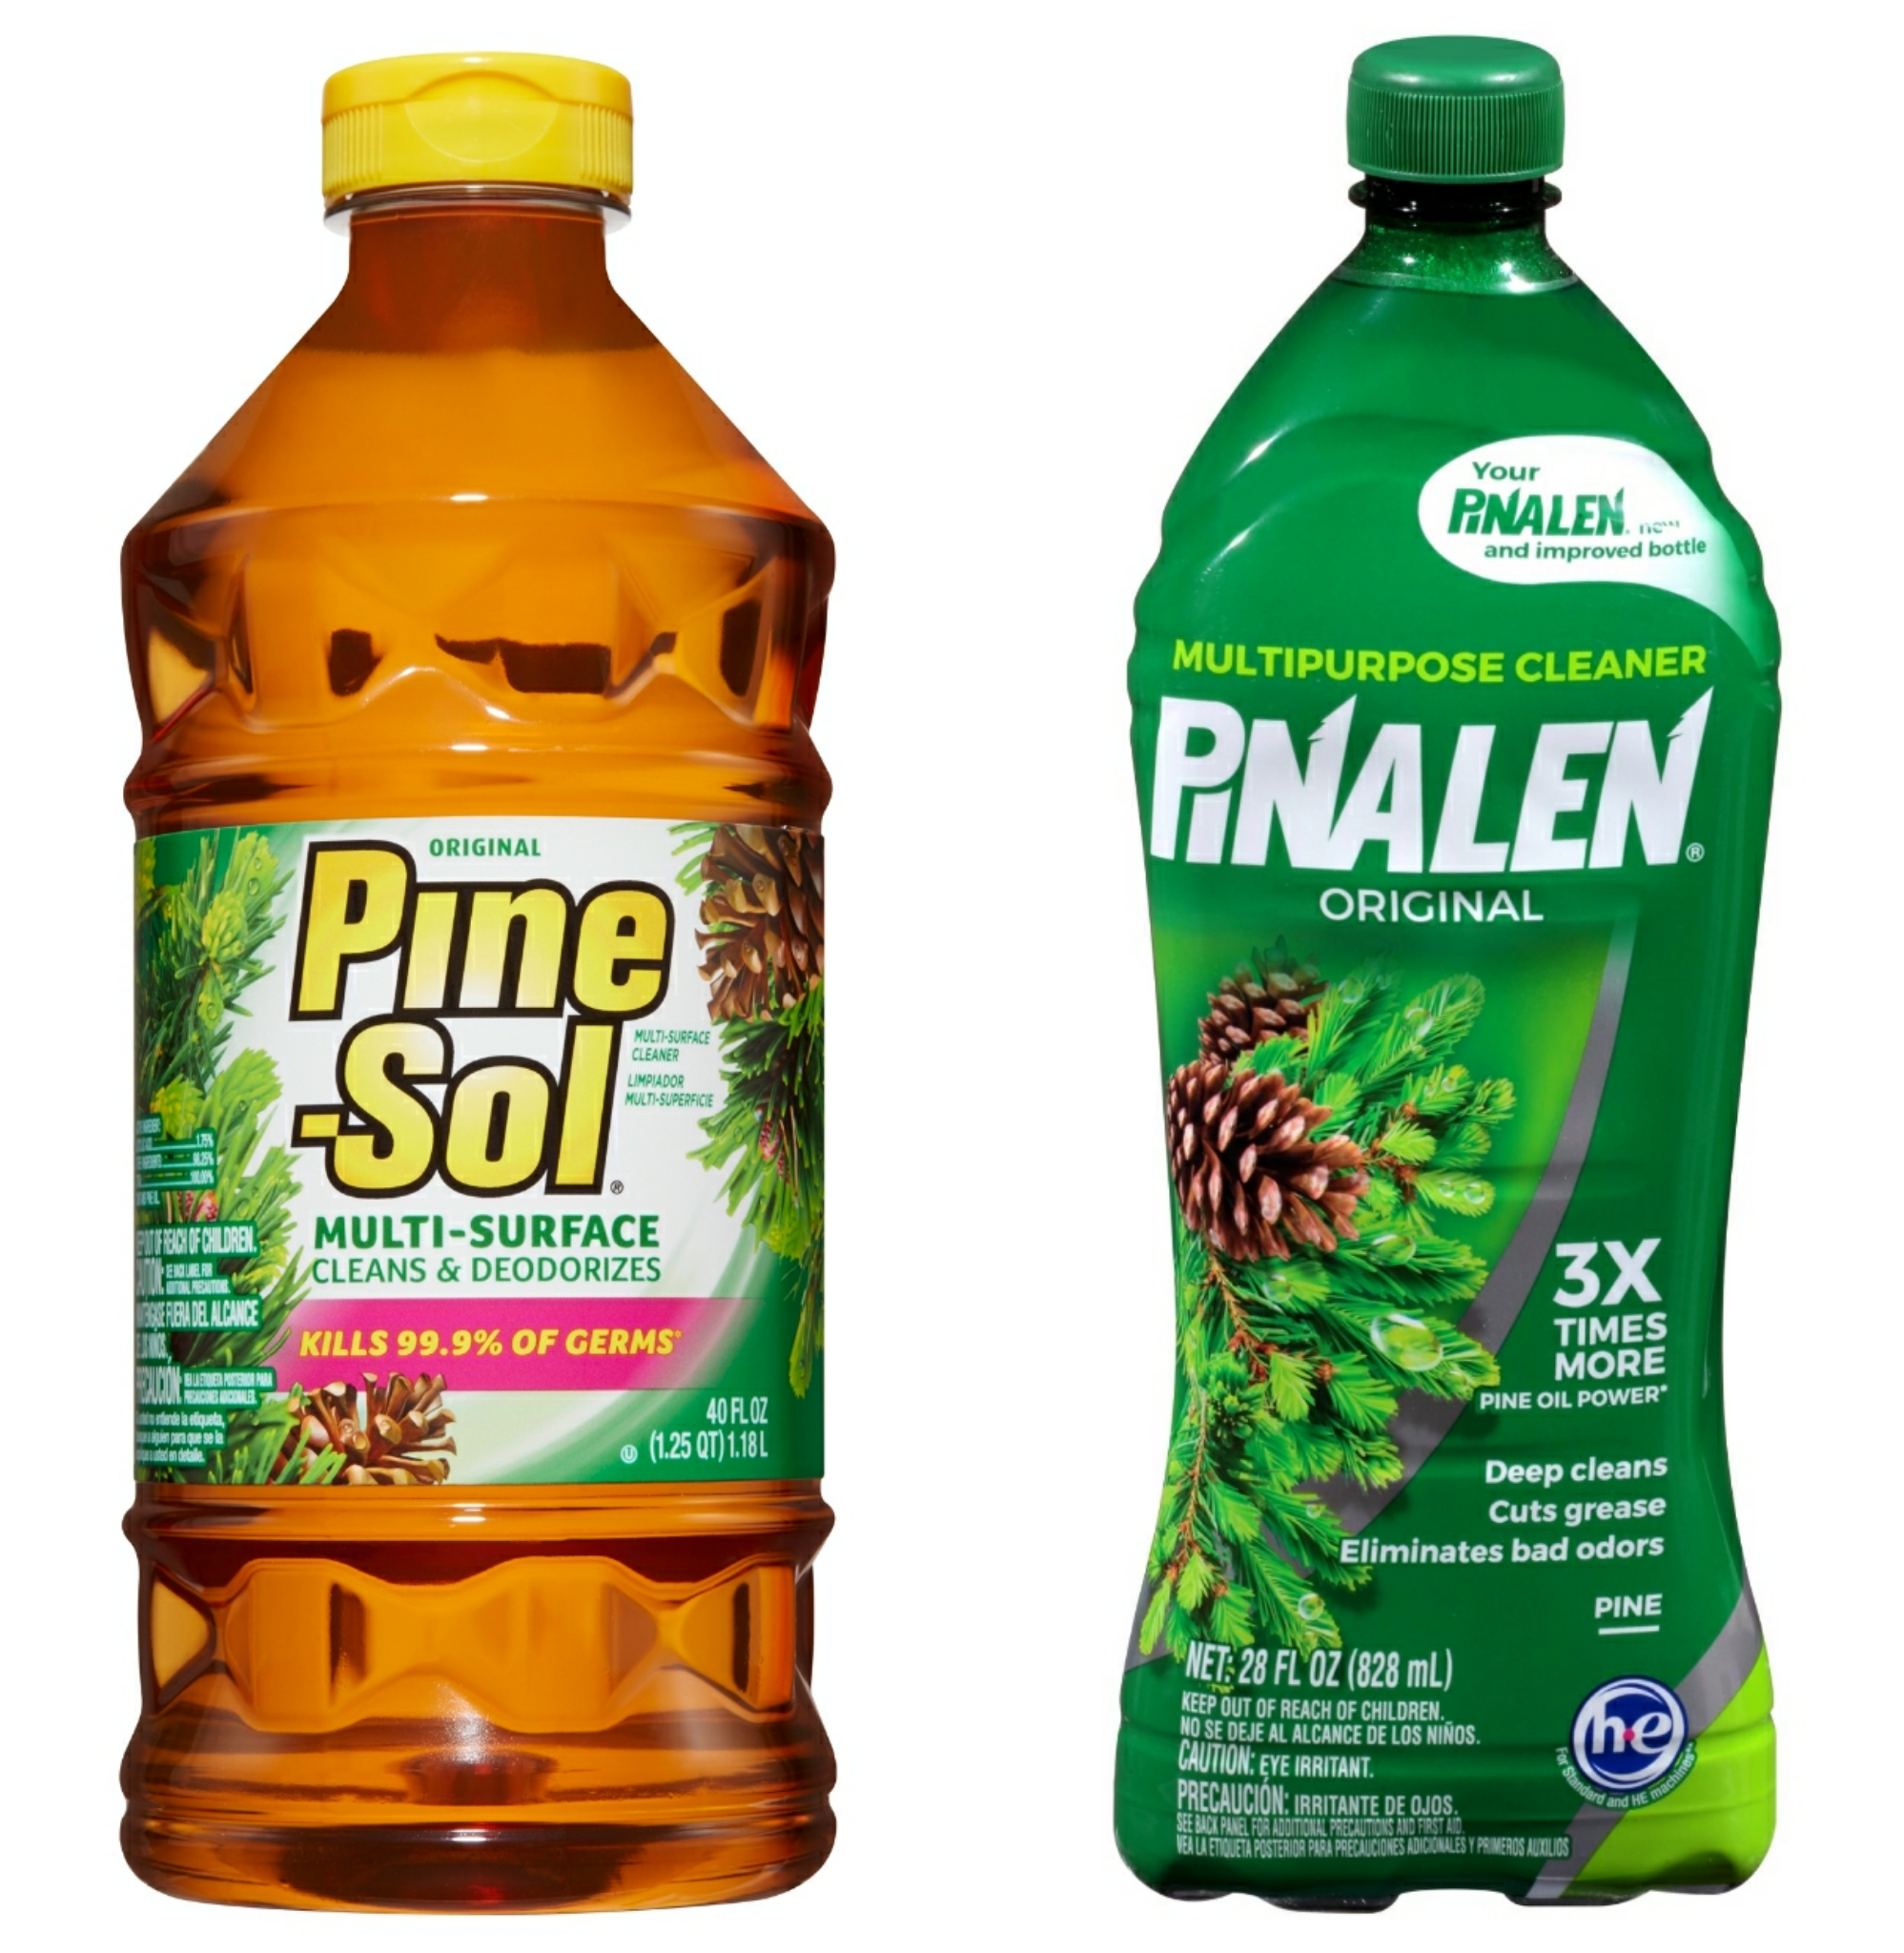 Can I Use Pine Sol in Laundry?